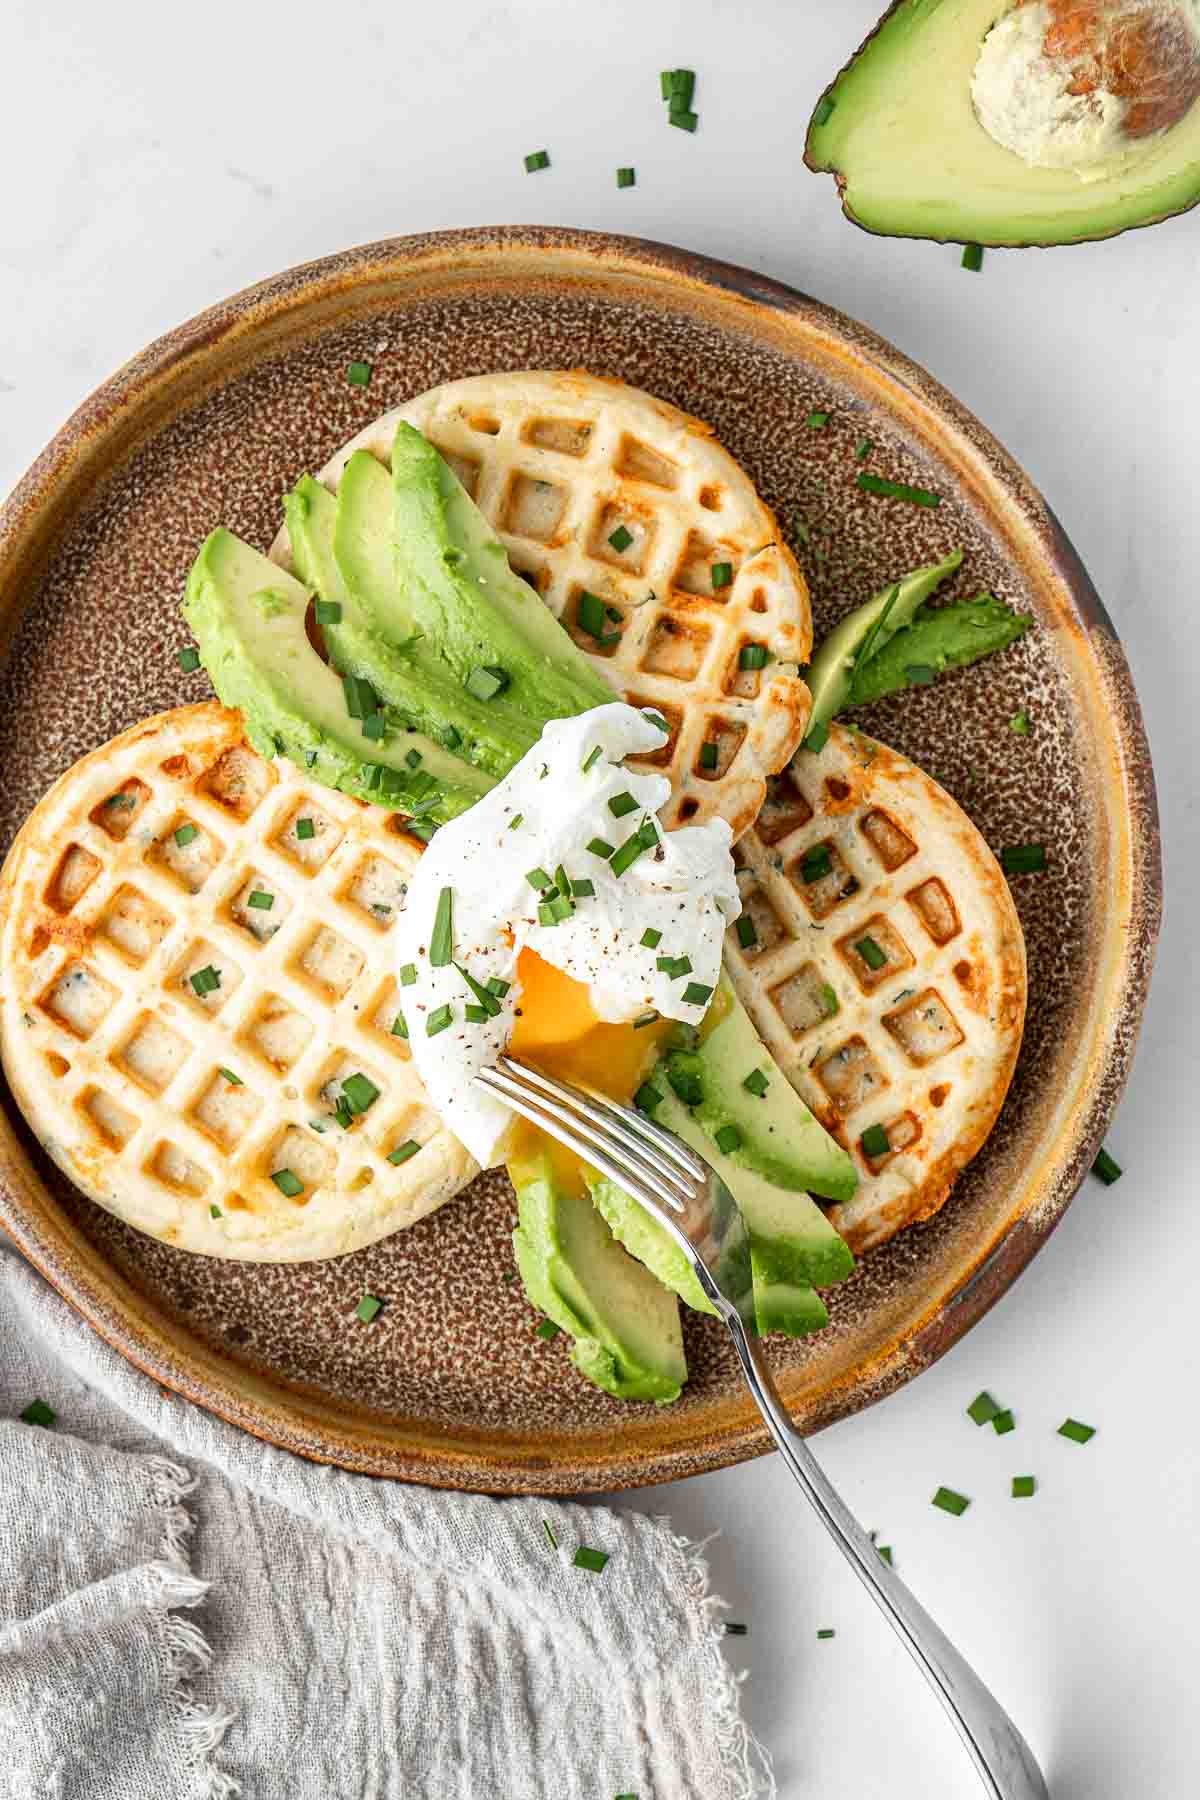 Overhead of poached egg and avocado on savoury waffles with fresh chives and a fork.